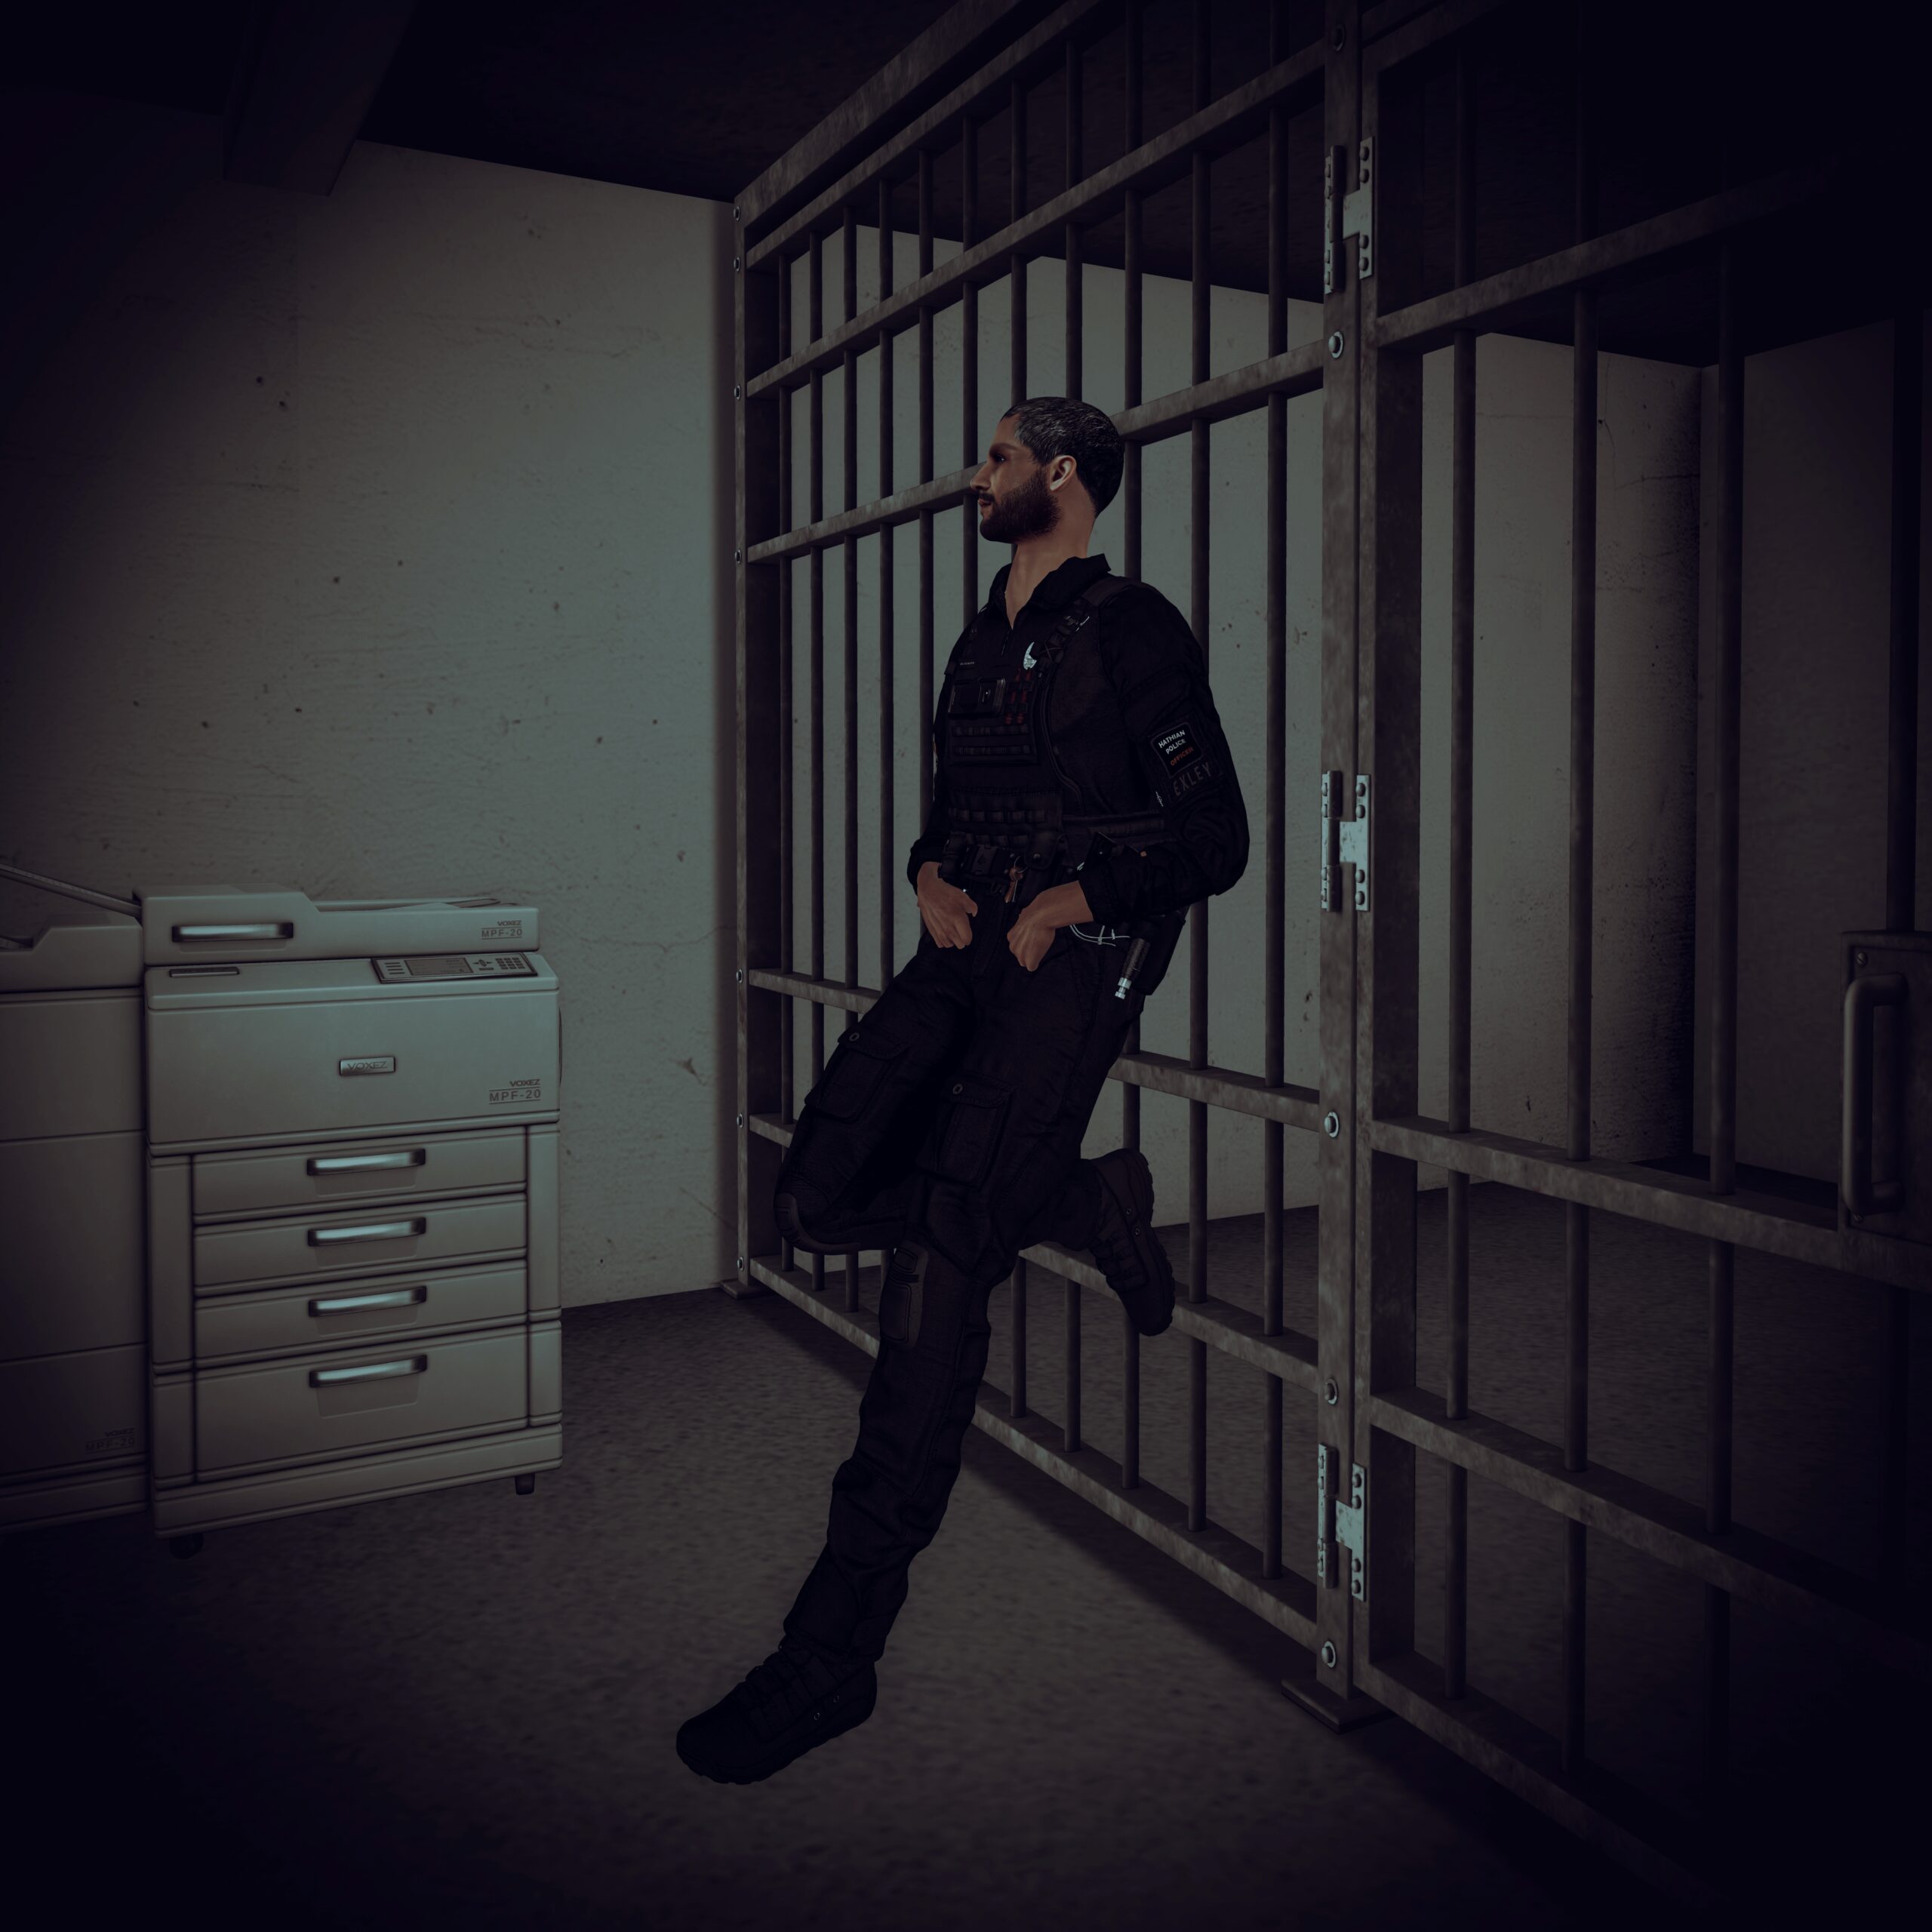 Officier Exley standing guard outside the CUPD Jail cell.